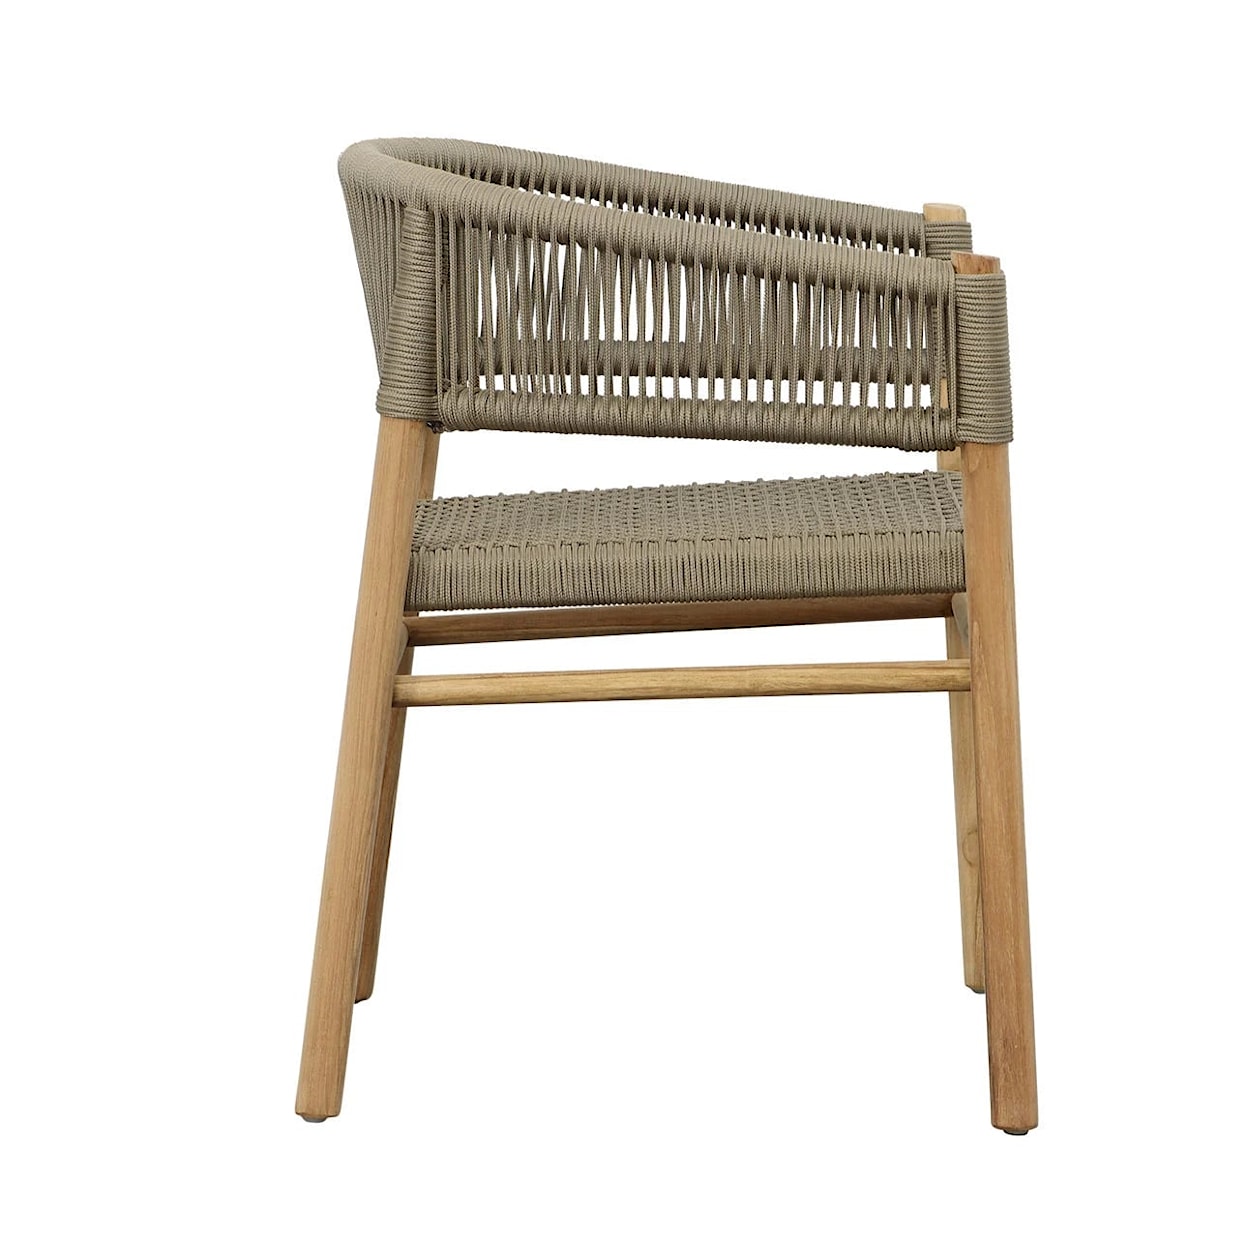 Dovetail Furniture Bettina Outdoor Chair